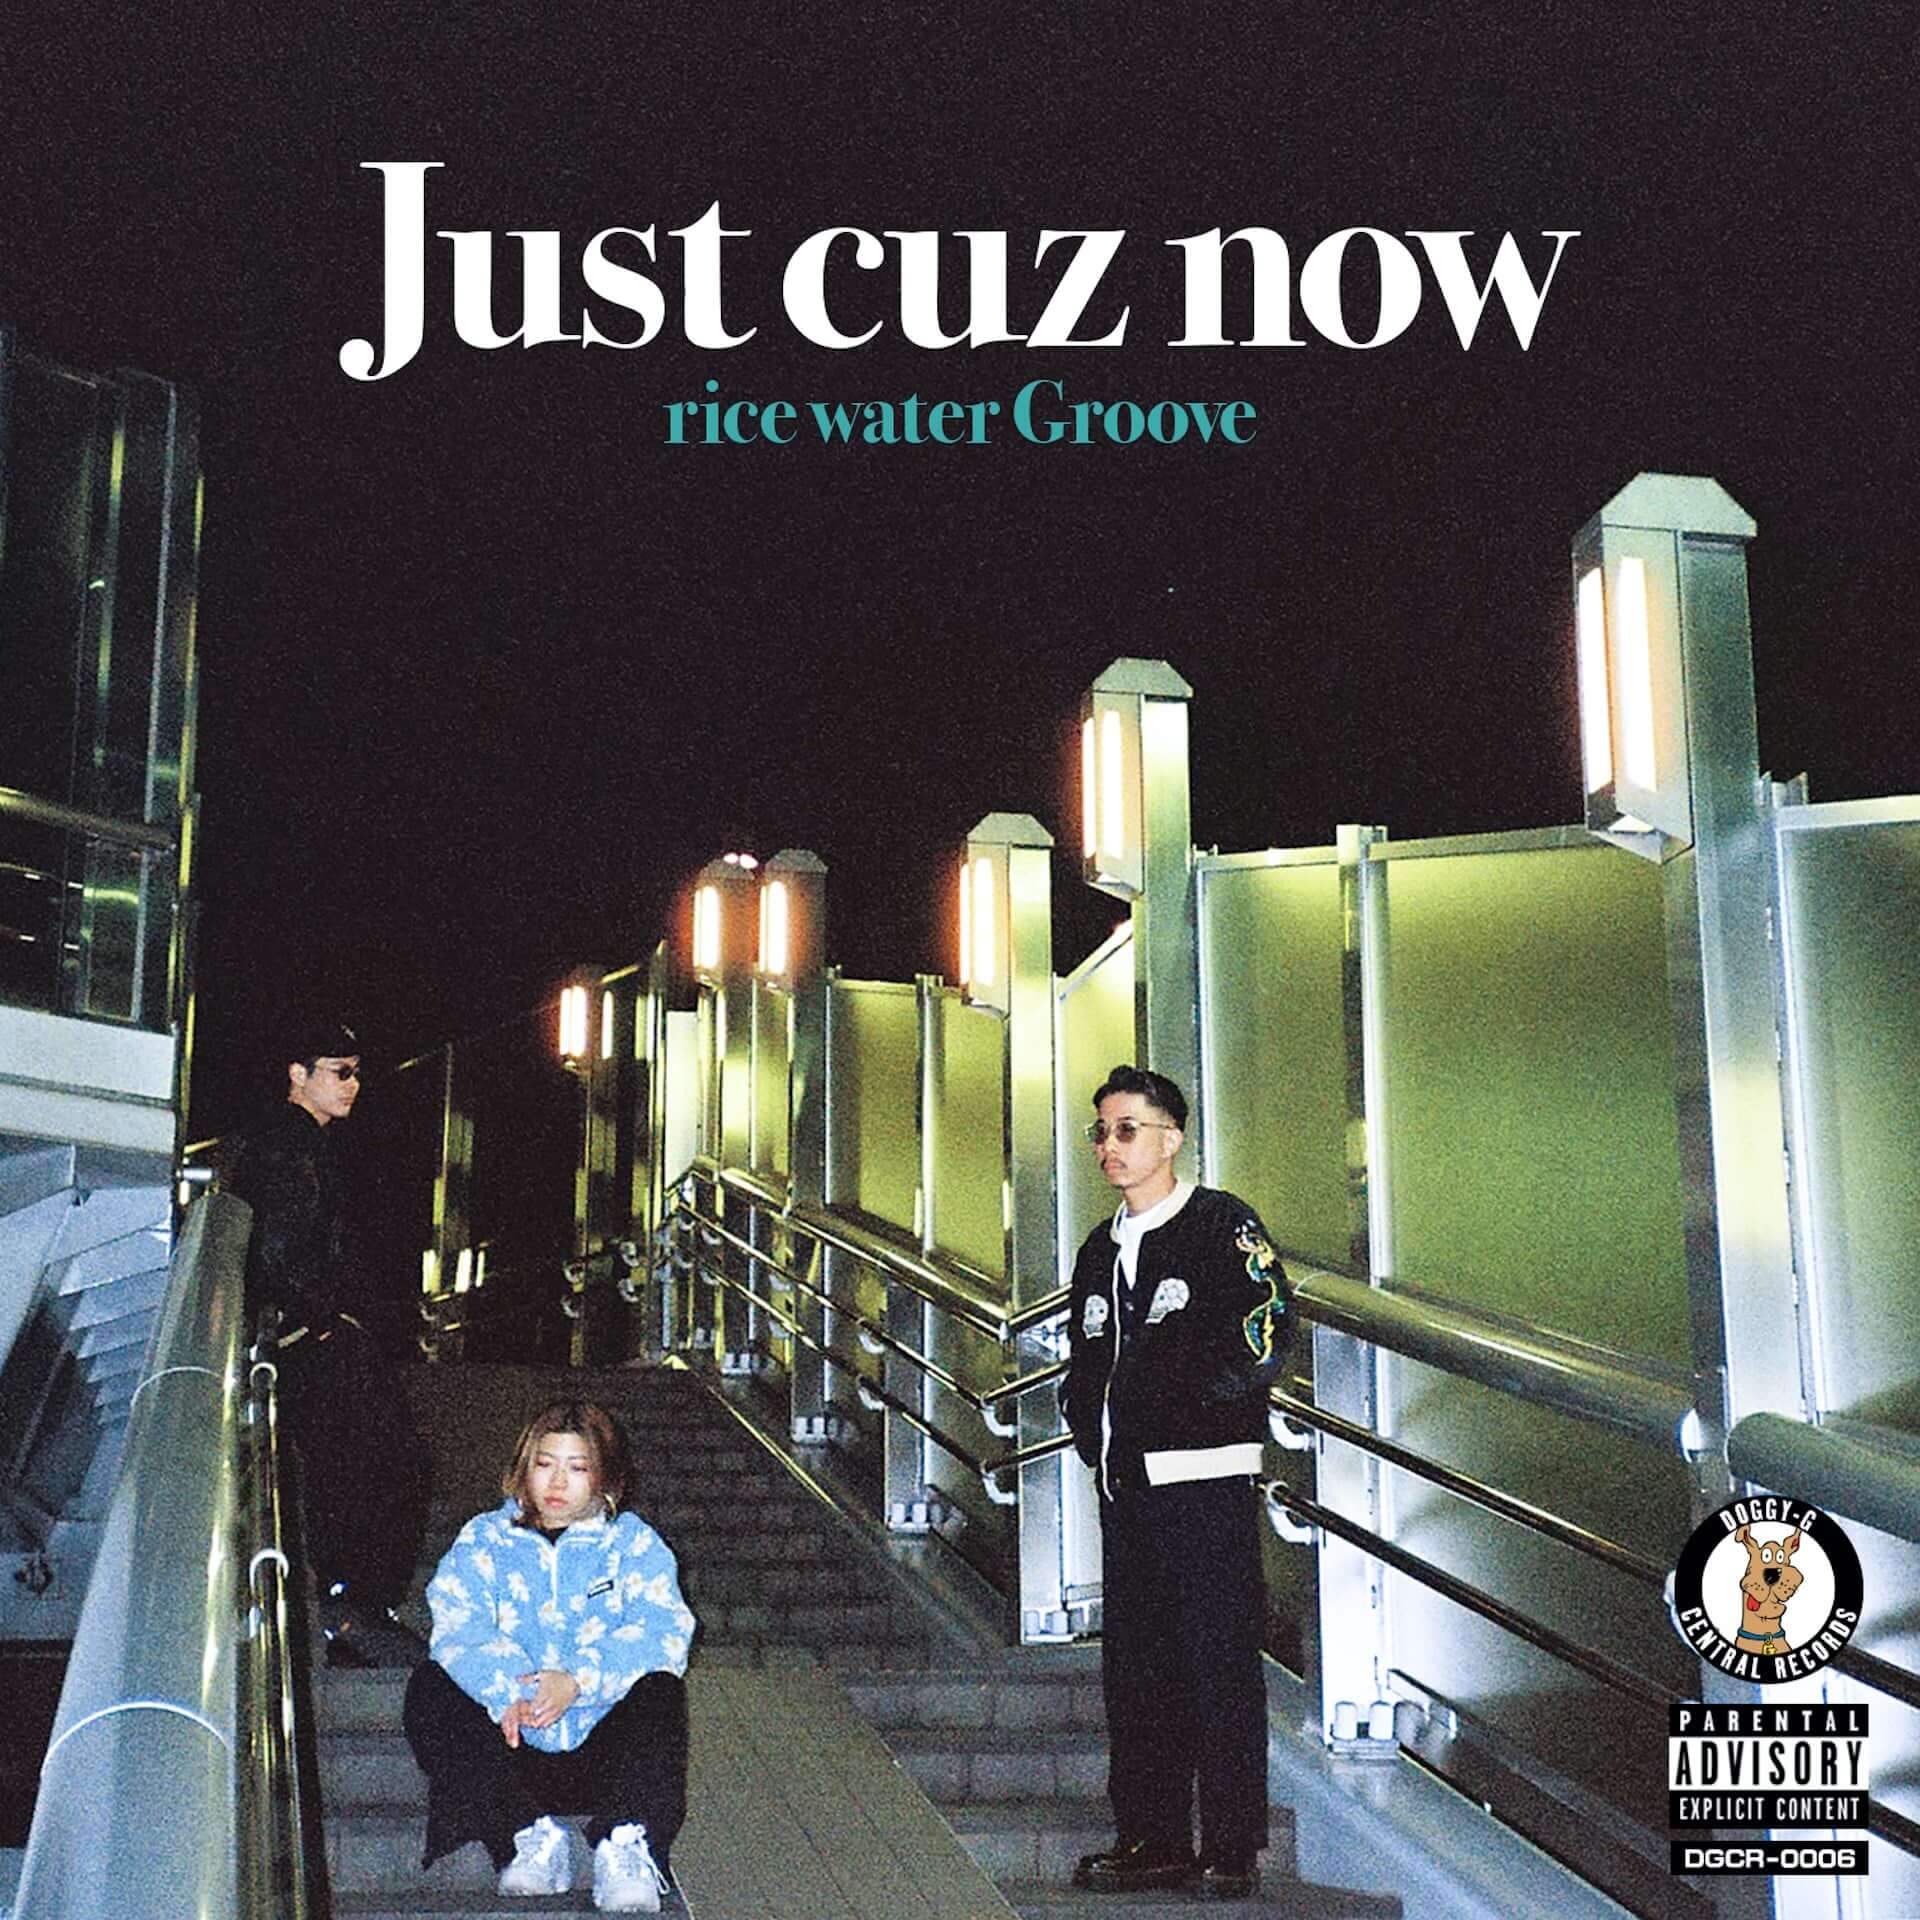 rice water Groove、7作目のシングル“Just cuz now”を〈Doggy G Central Records〉よりリリース！MVも公開 music210217_rice-water-groove_1-1920x1920